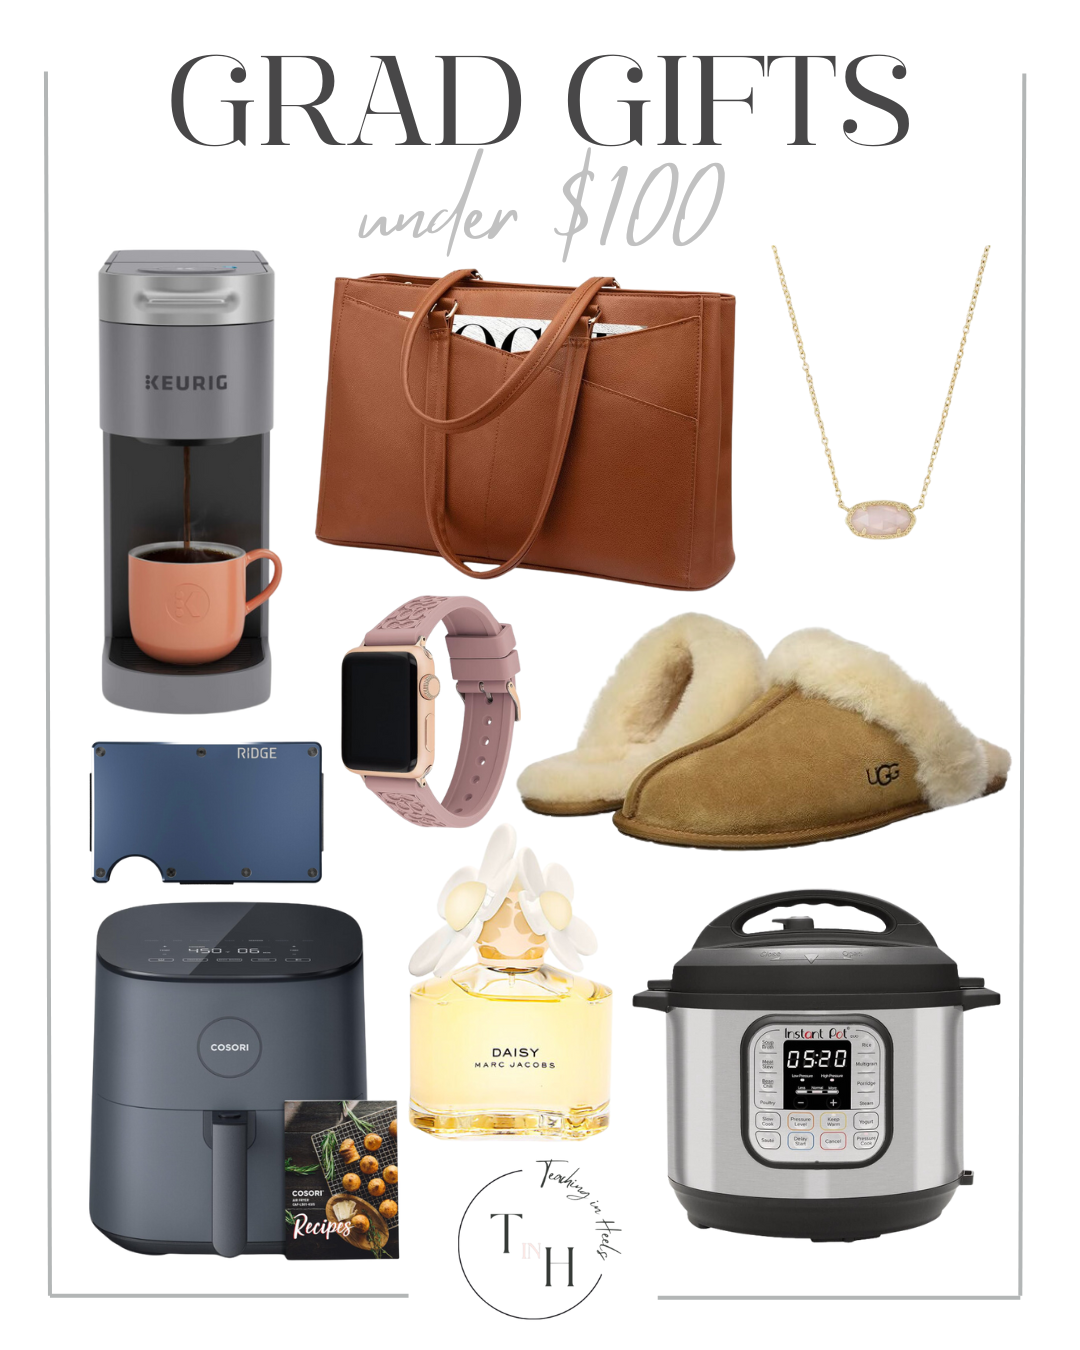 The Ultimate Graduation Gift Guide 2024

Graduation, graduation gifts, gift guide, gifts, grad gifts, seasonal gifts, splurge gifts, gifting, coffee maker, tote bag, necklace